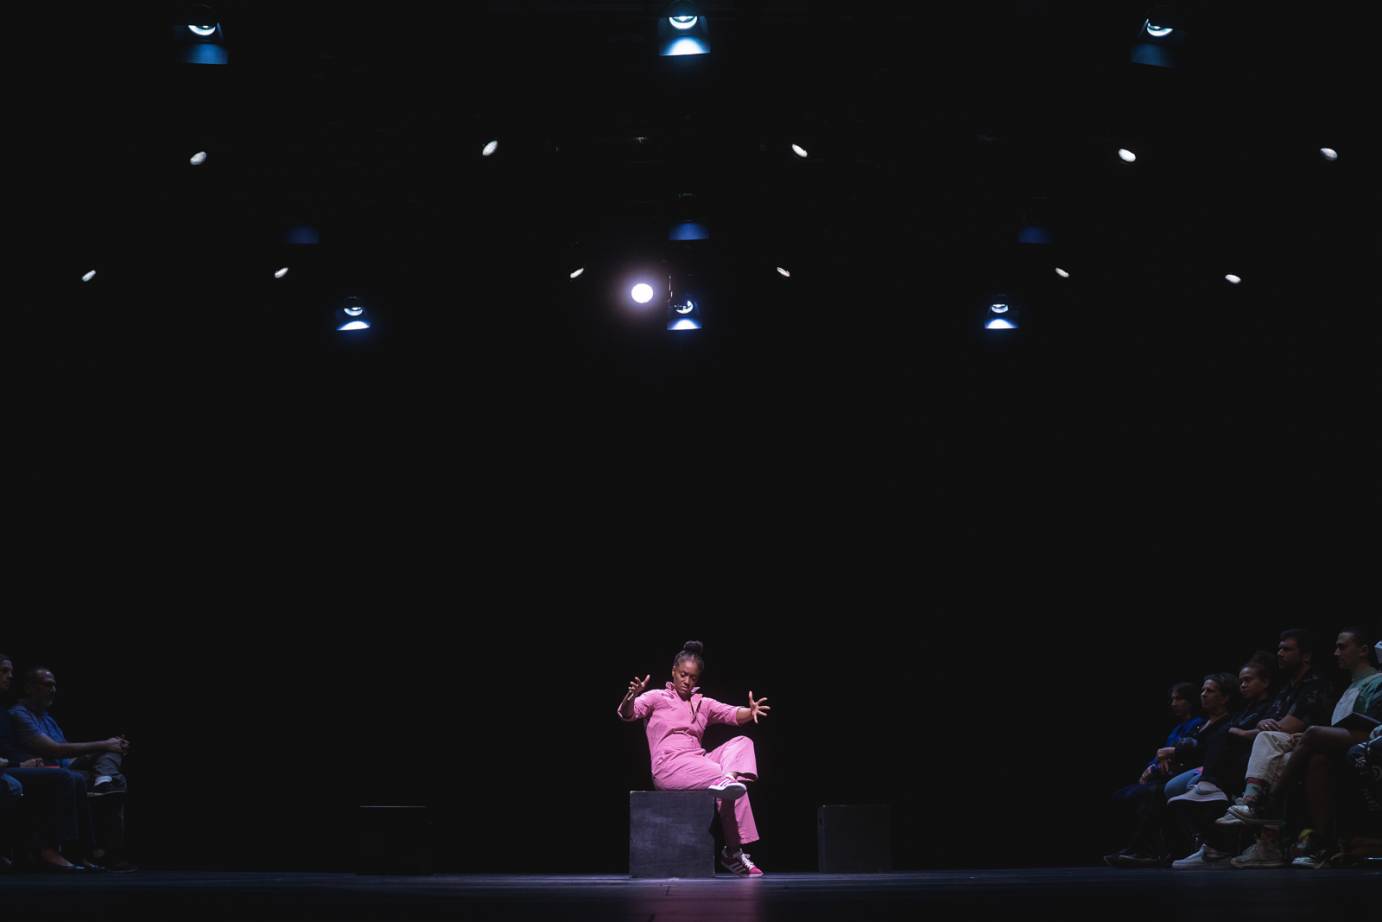 black dancer in a pink work uniform sits in the center of two groups of audience members. Her legs are crossed and her arms are open in front of her with fingers extended.